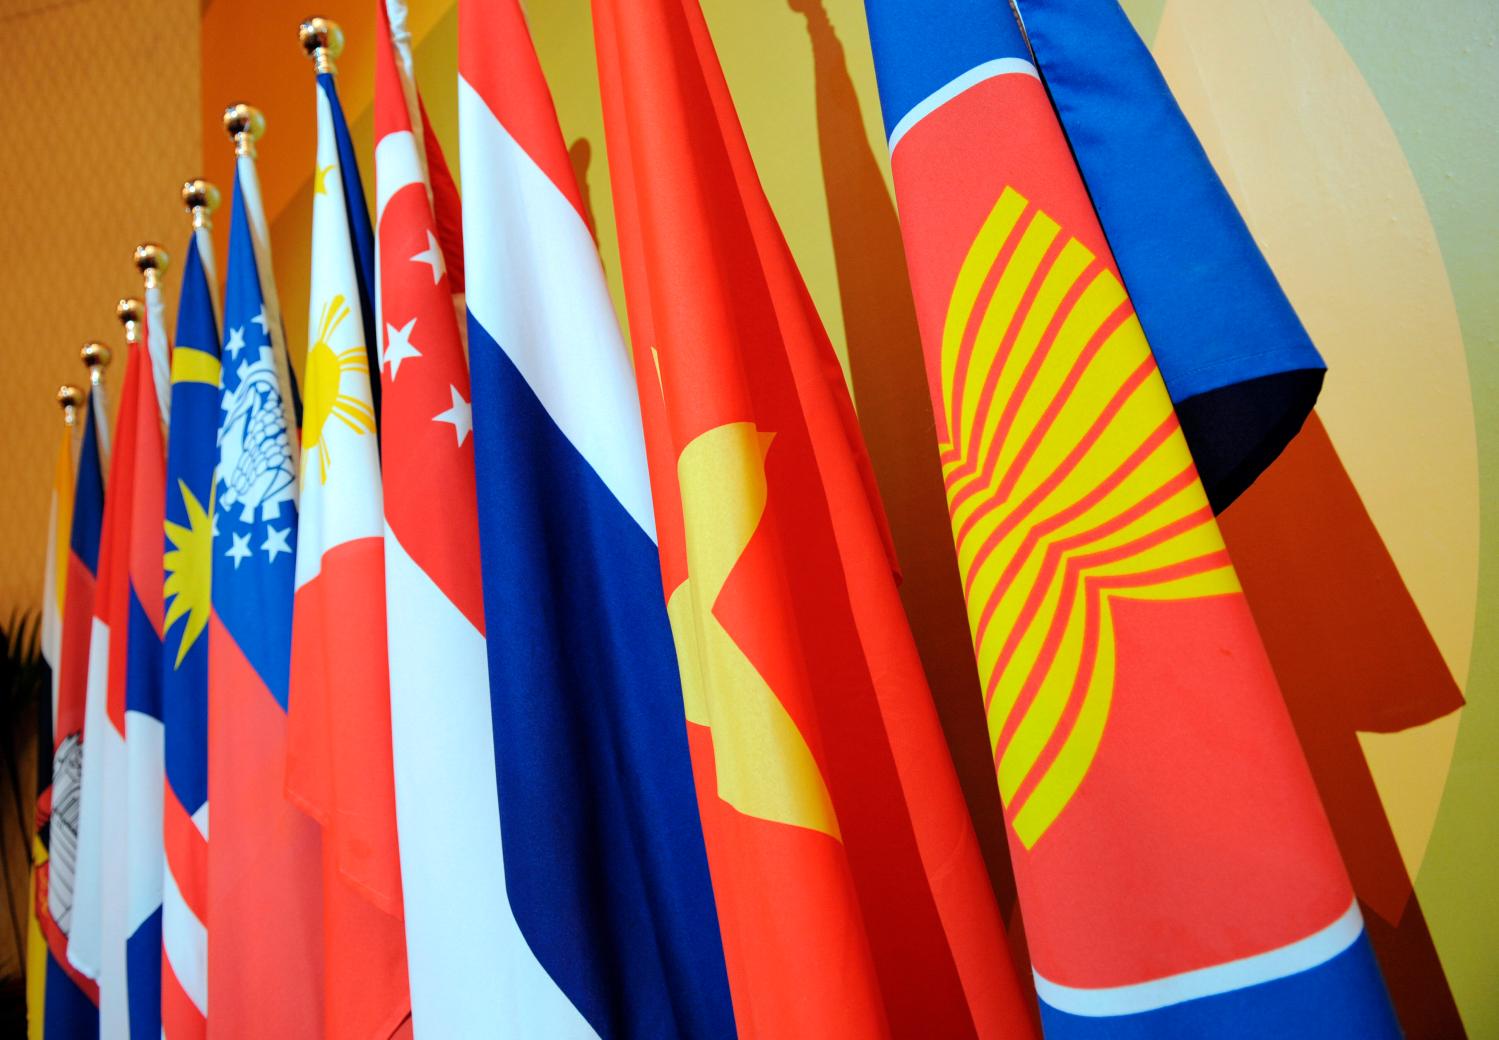 The Association of Southeast Asian Nations (ASEAN) flag leads the flags of the 10-member countries during the ASEAN Regional Forum meeting in Singapore.